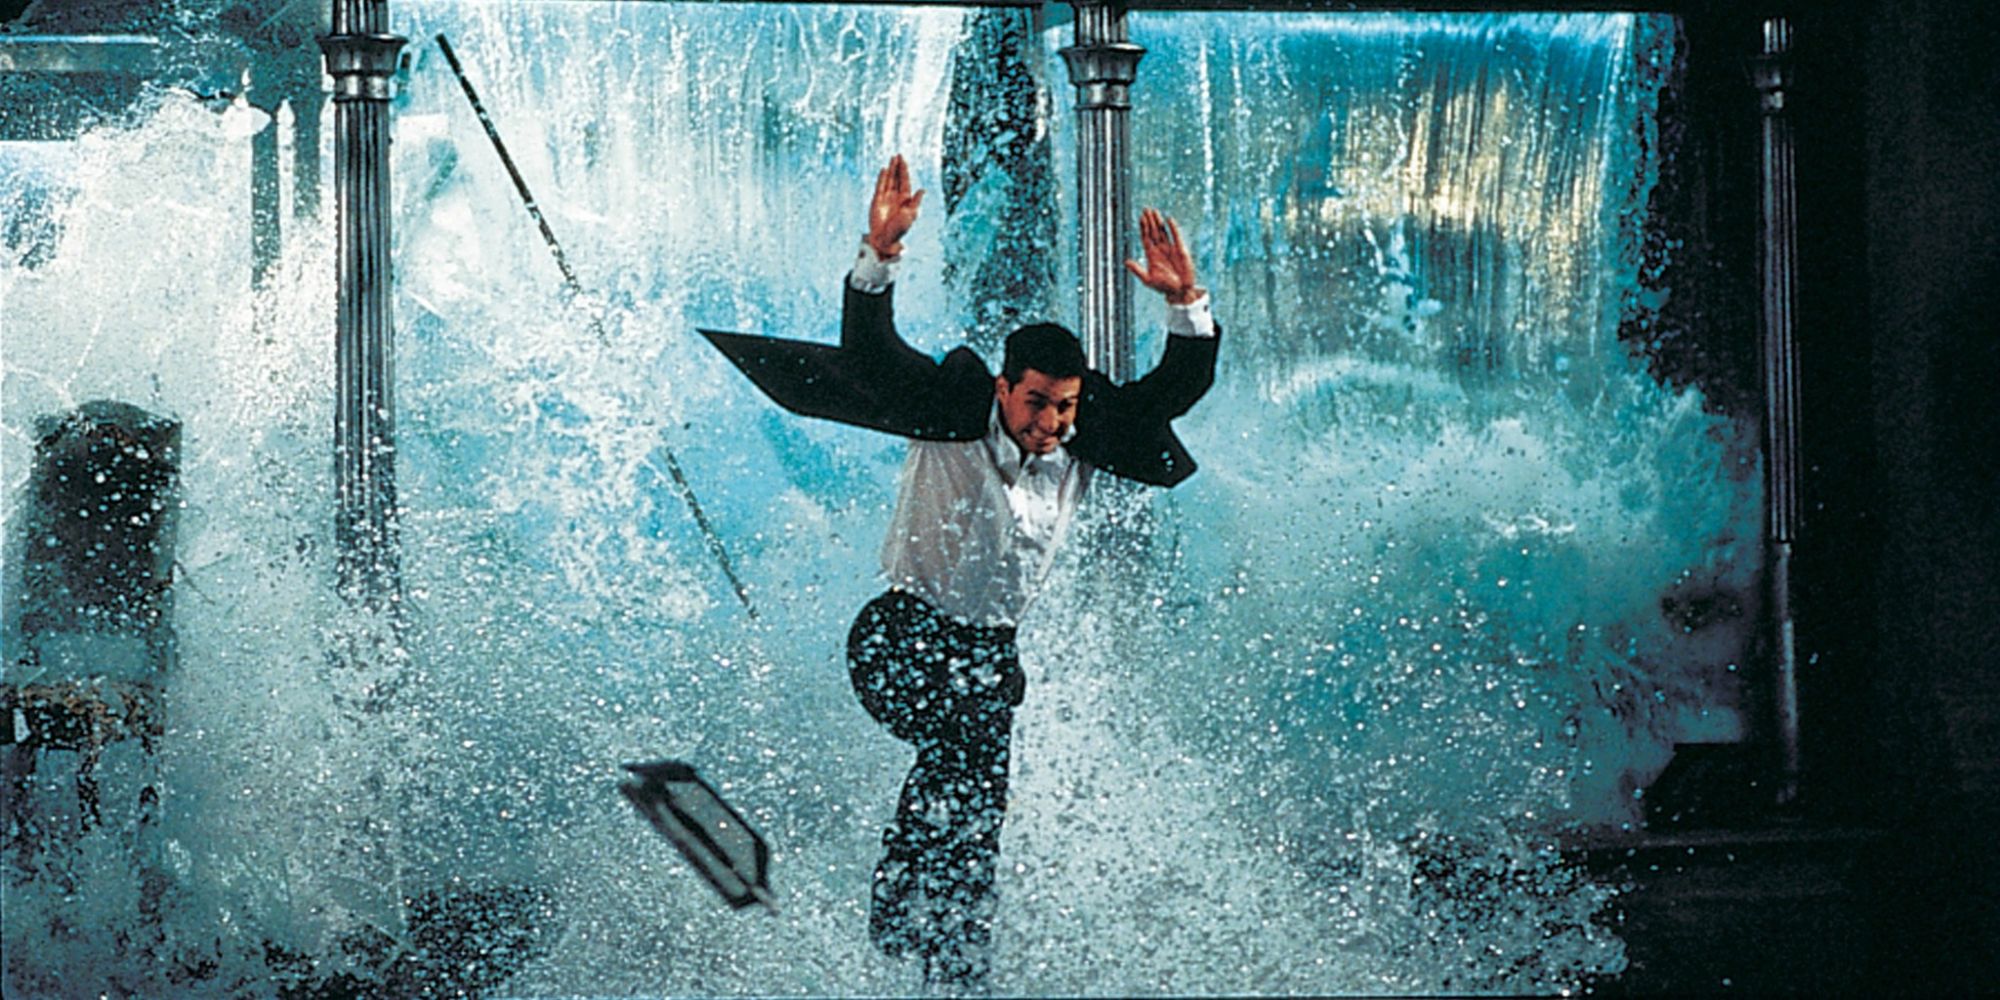 Breaking fish tank scene in Mission Impossible with Tom Cruise jumping